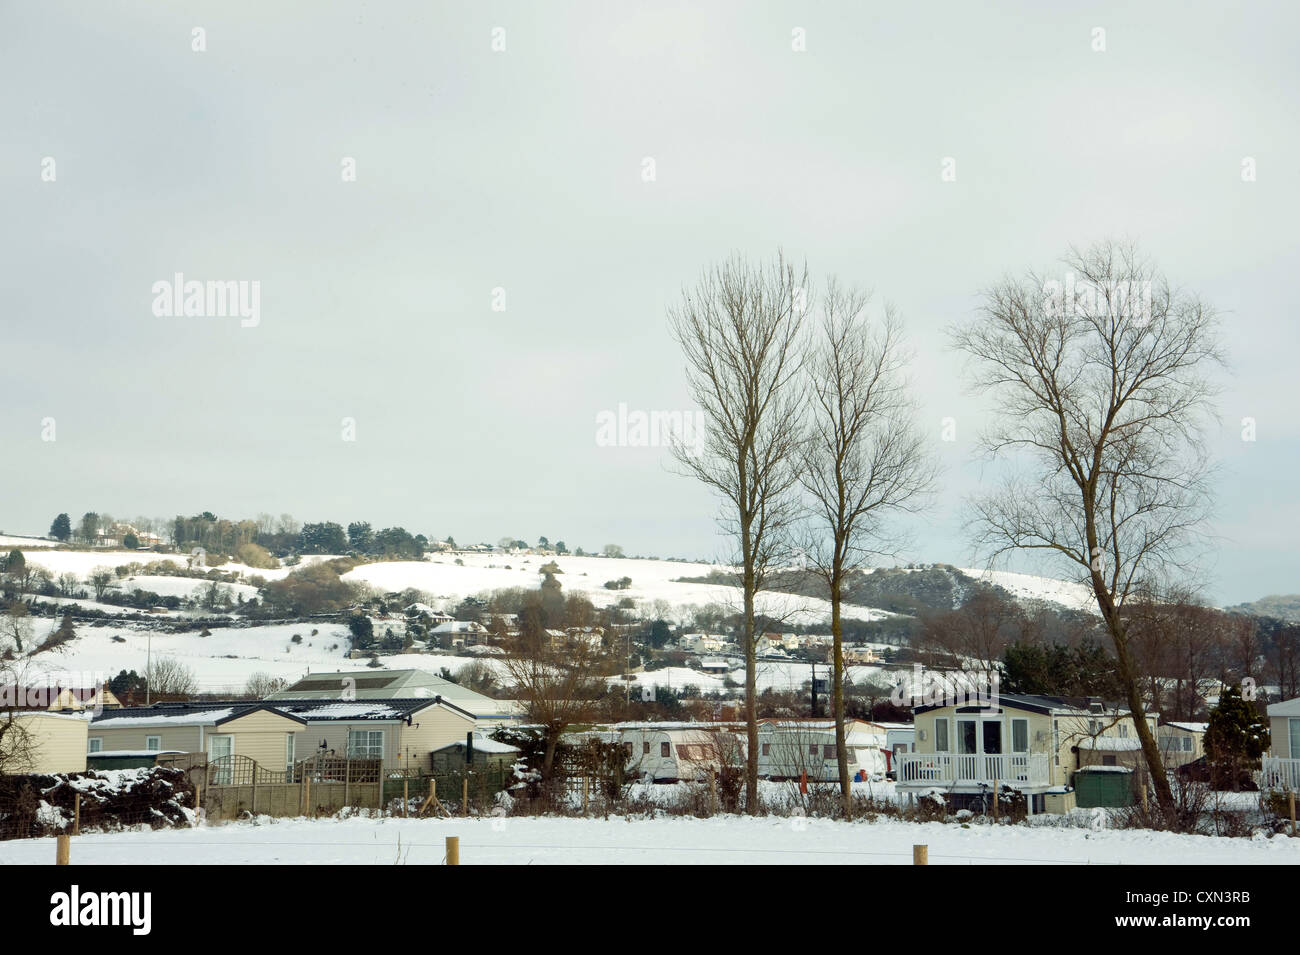 Caravan park covered with snow near Weston Super Mare, Somerset, England Stock Photo